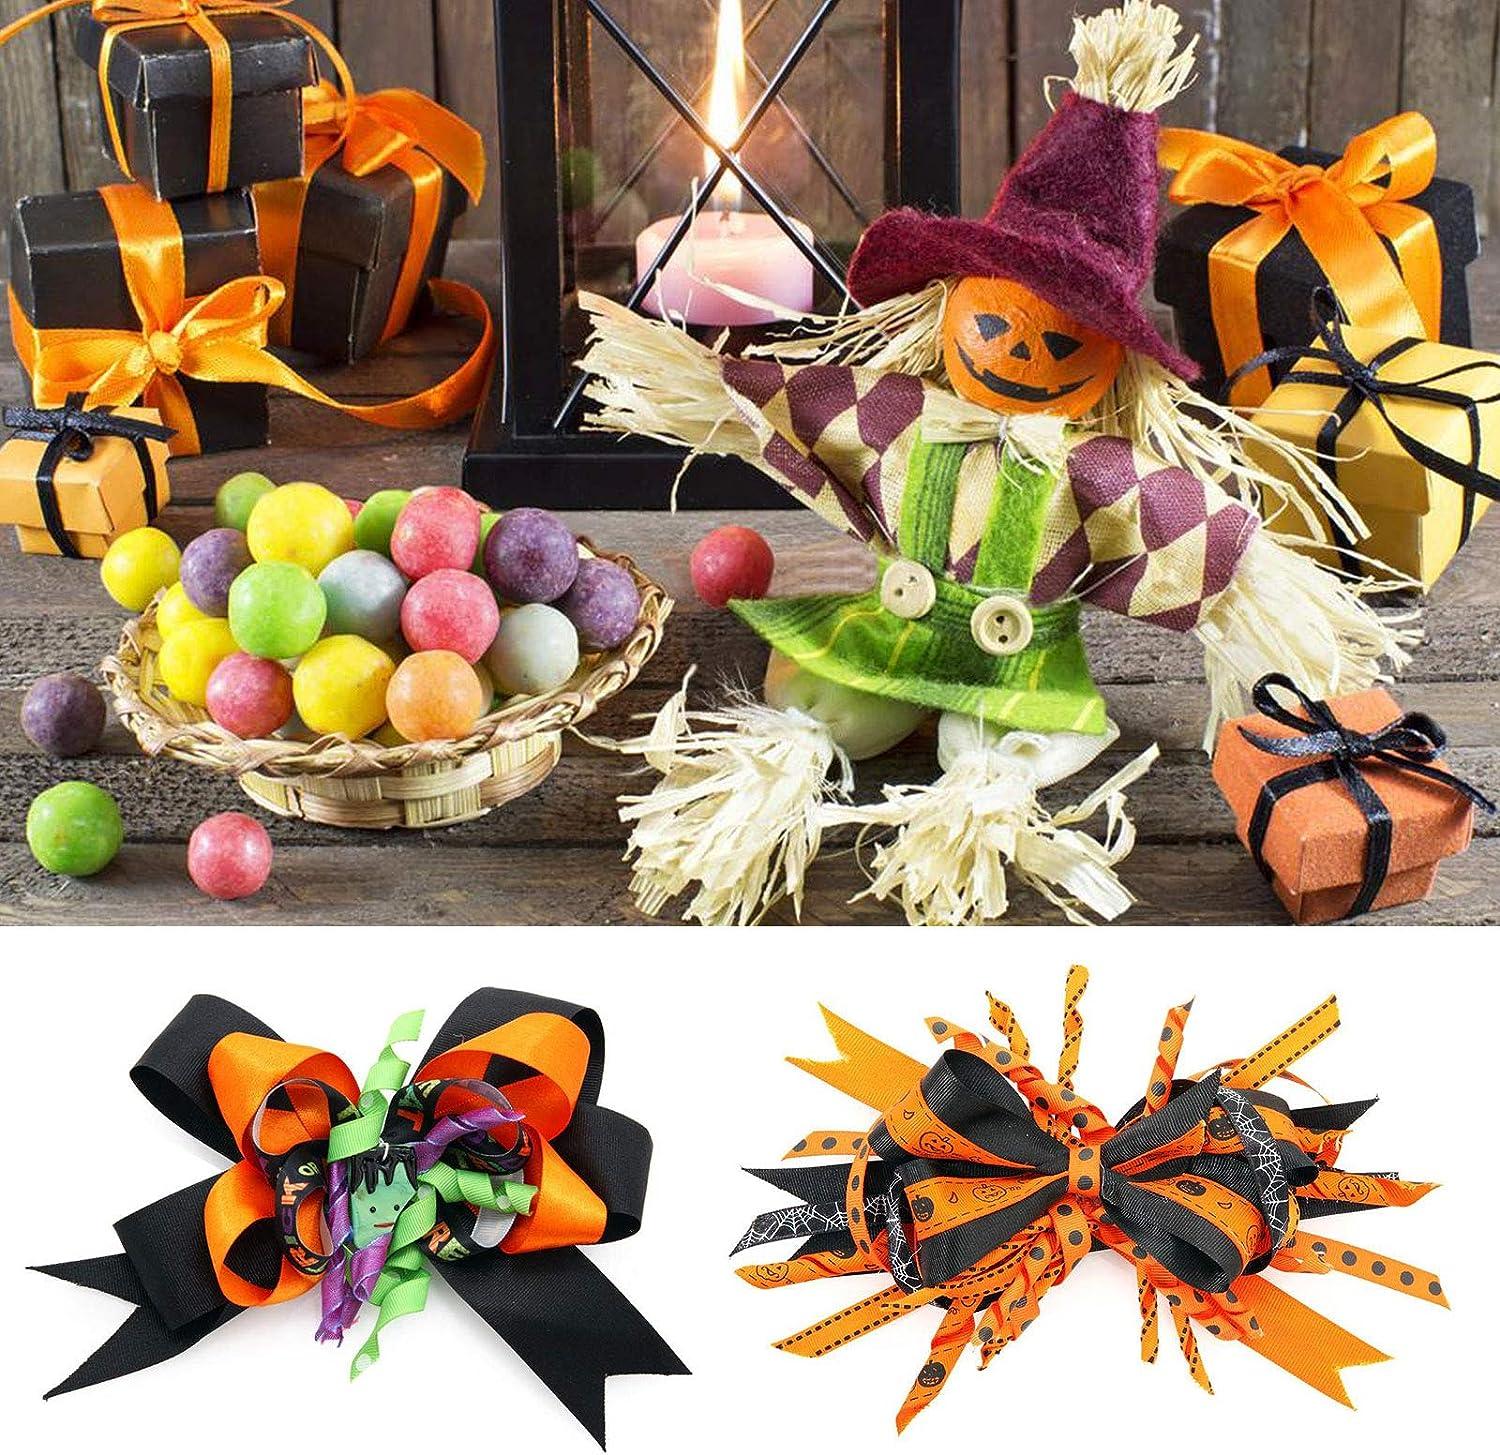 Bow Making Tool Of Ribbon Holiday Wreath Bow Maker Wooden Bow Maker Wreath  Bowing Making Tool Lightweight Authoring Tools - AliExpress